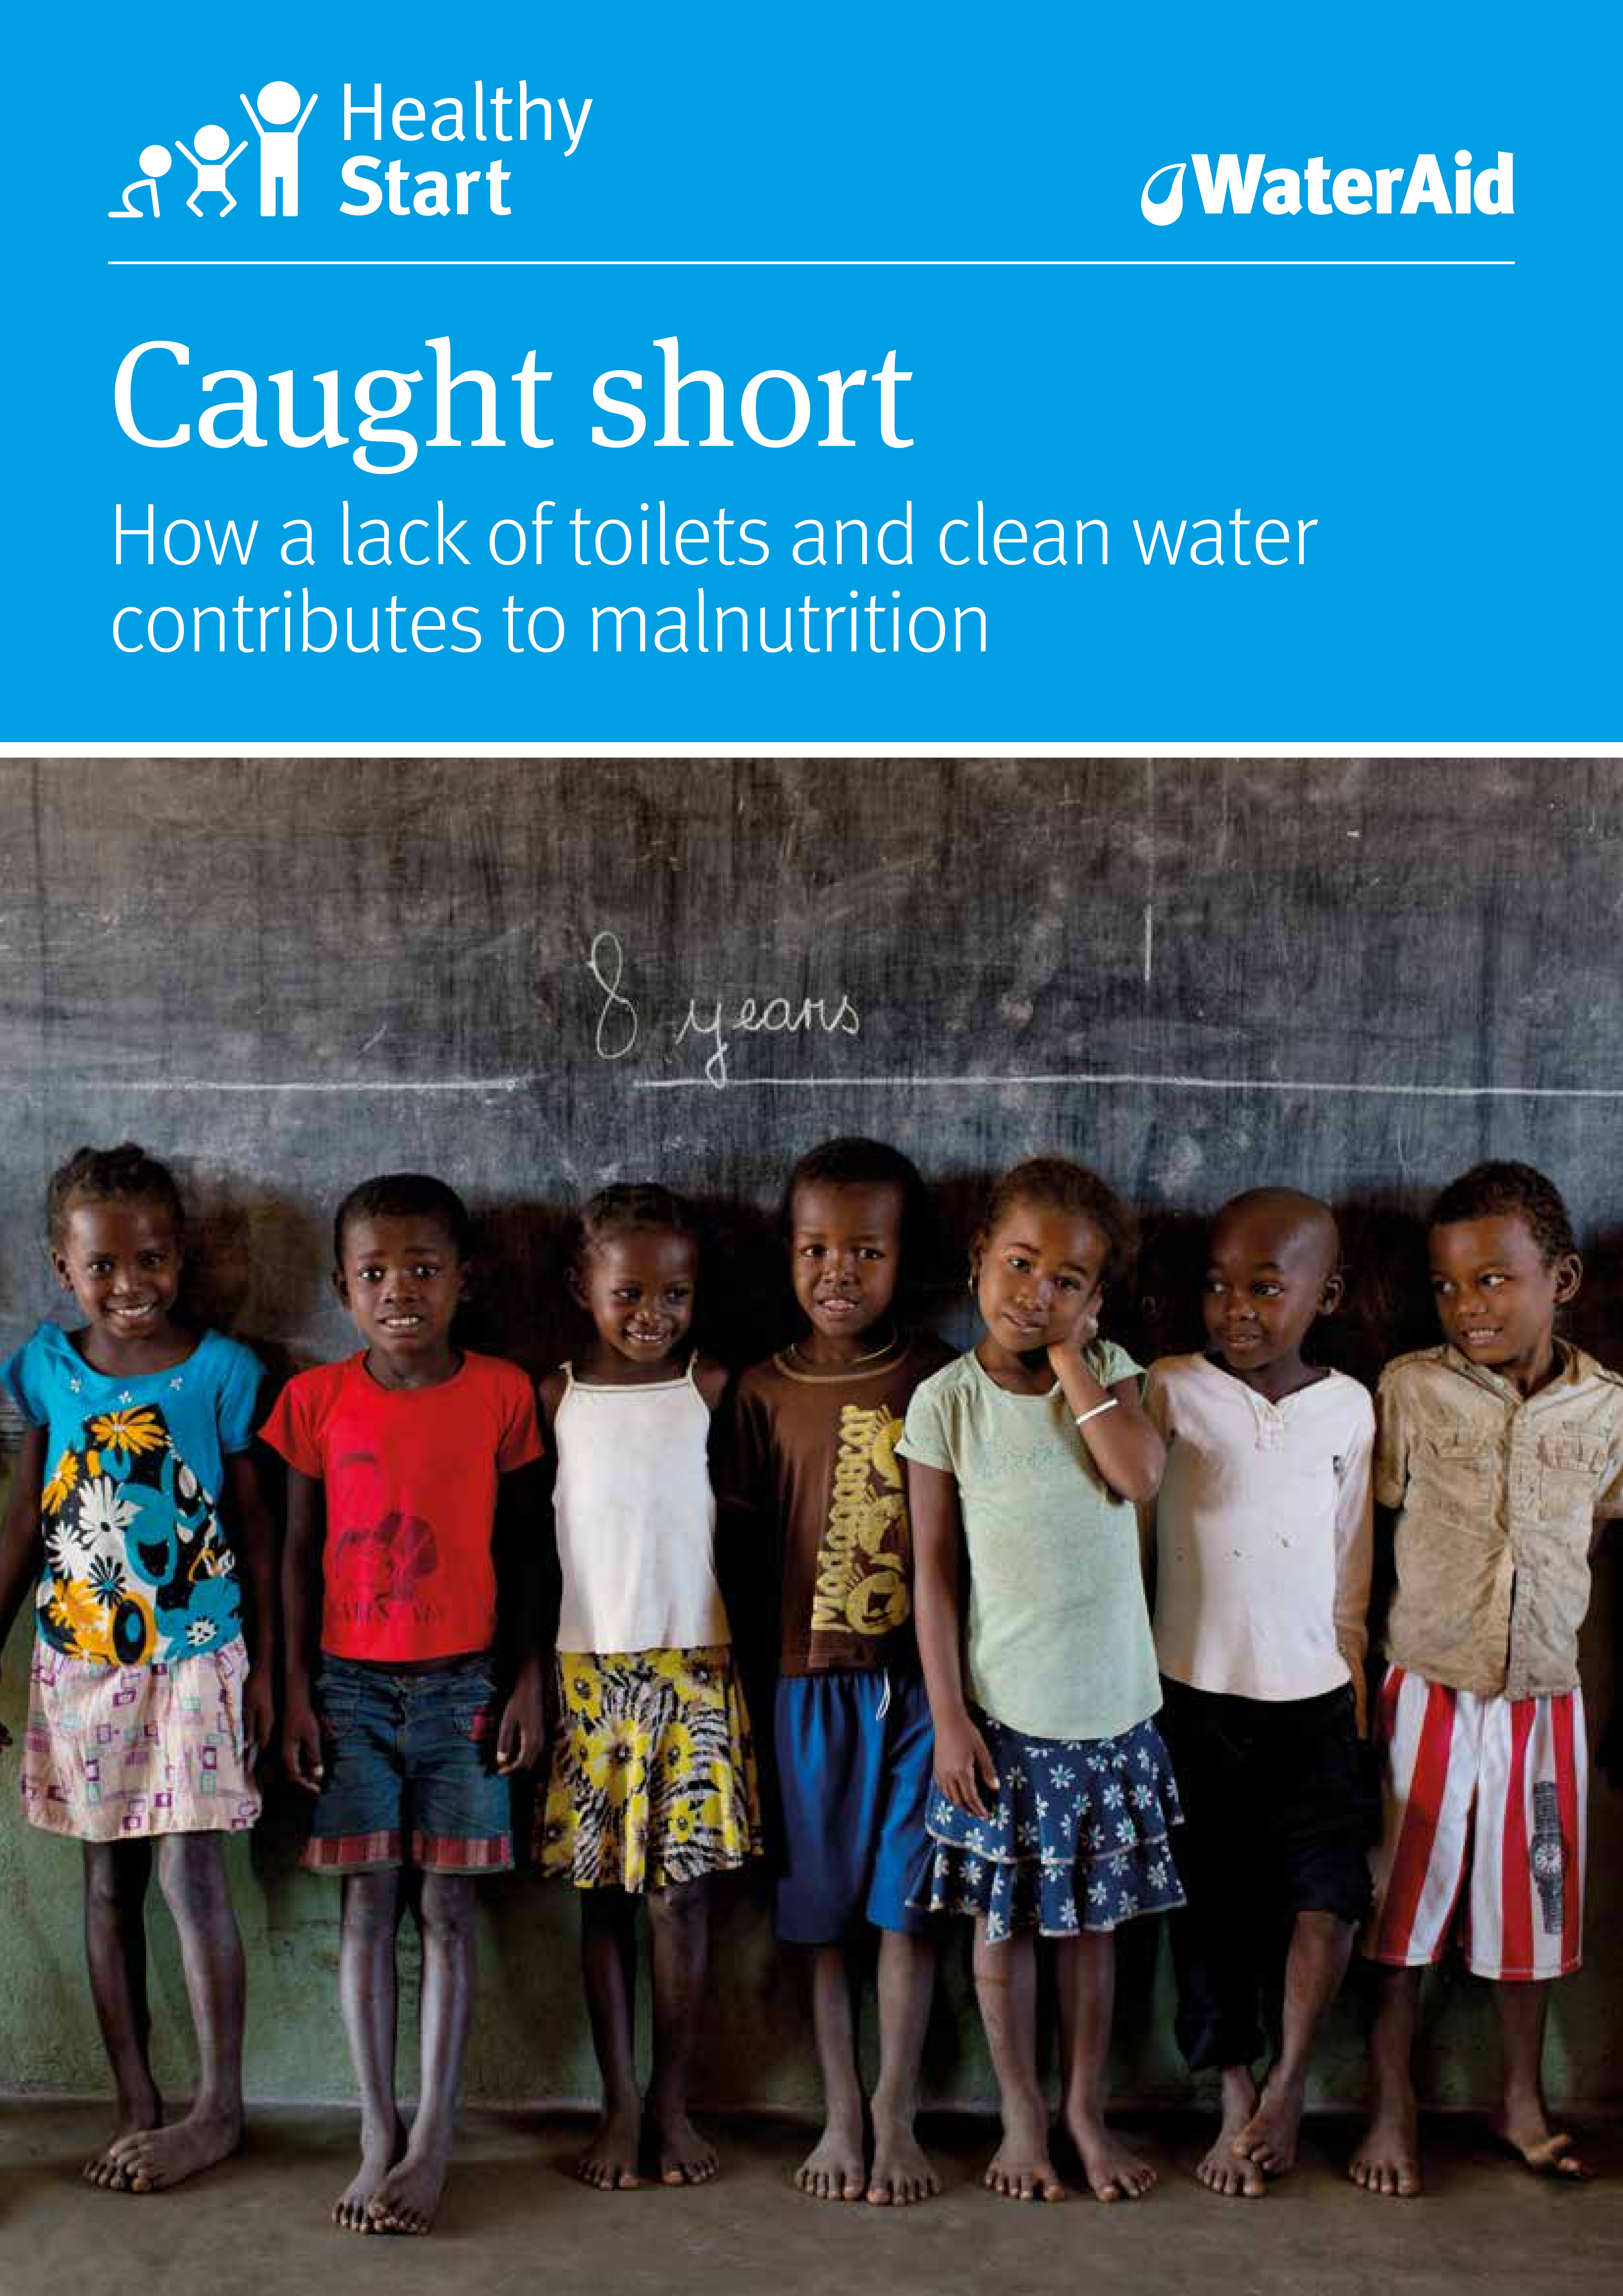 Caught short: How a lack of toilets and clean water contributes to malnutrition